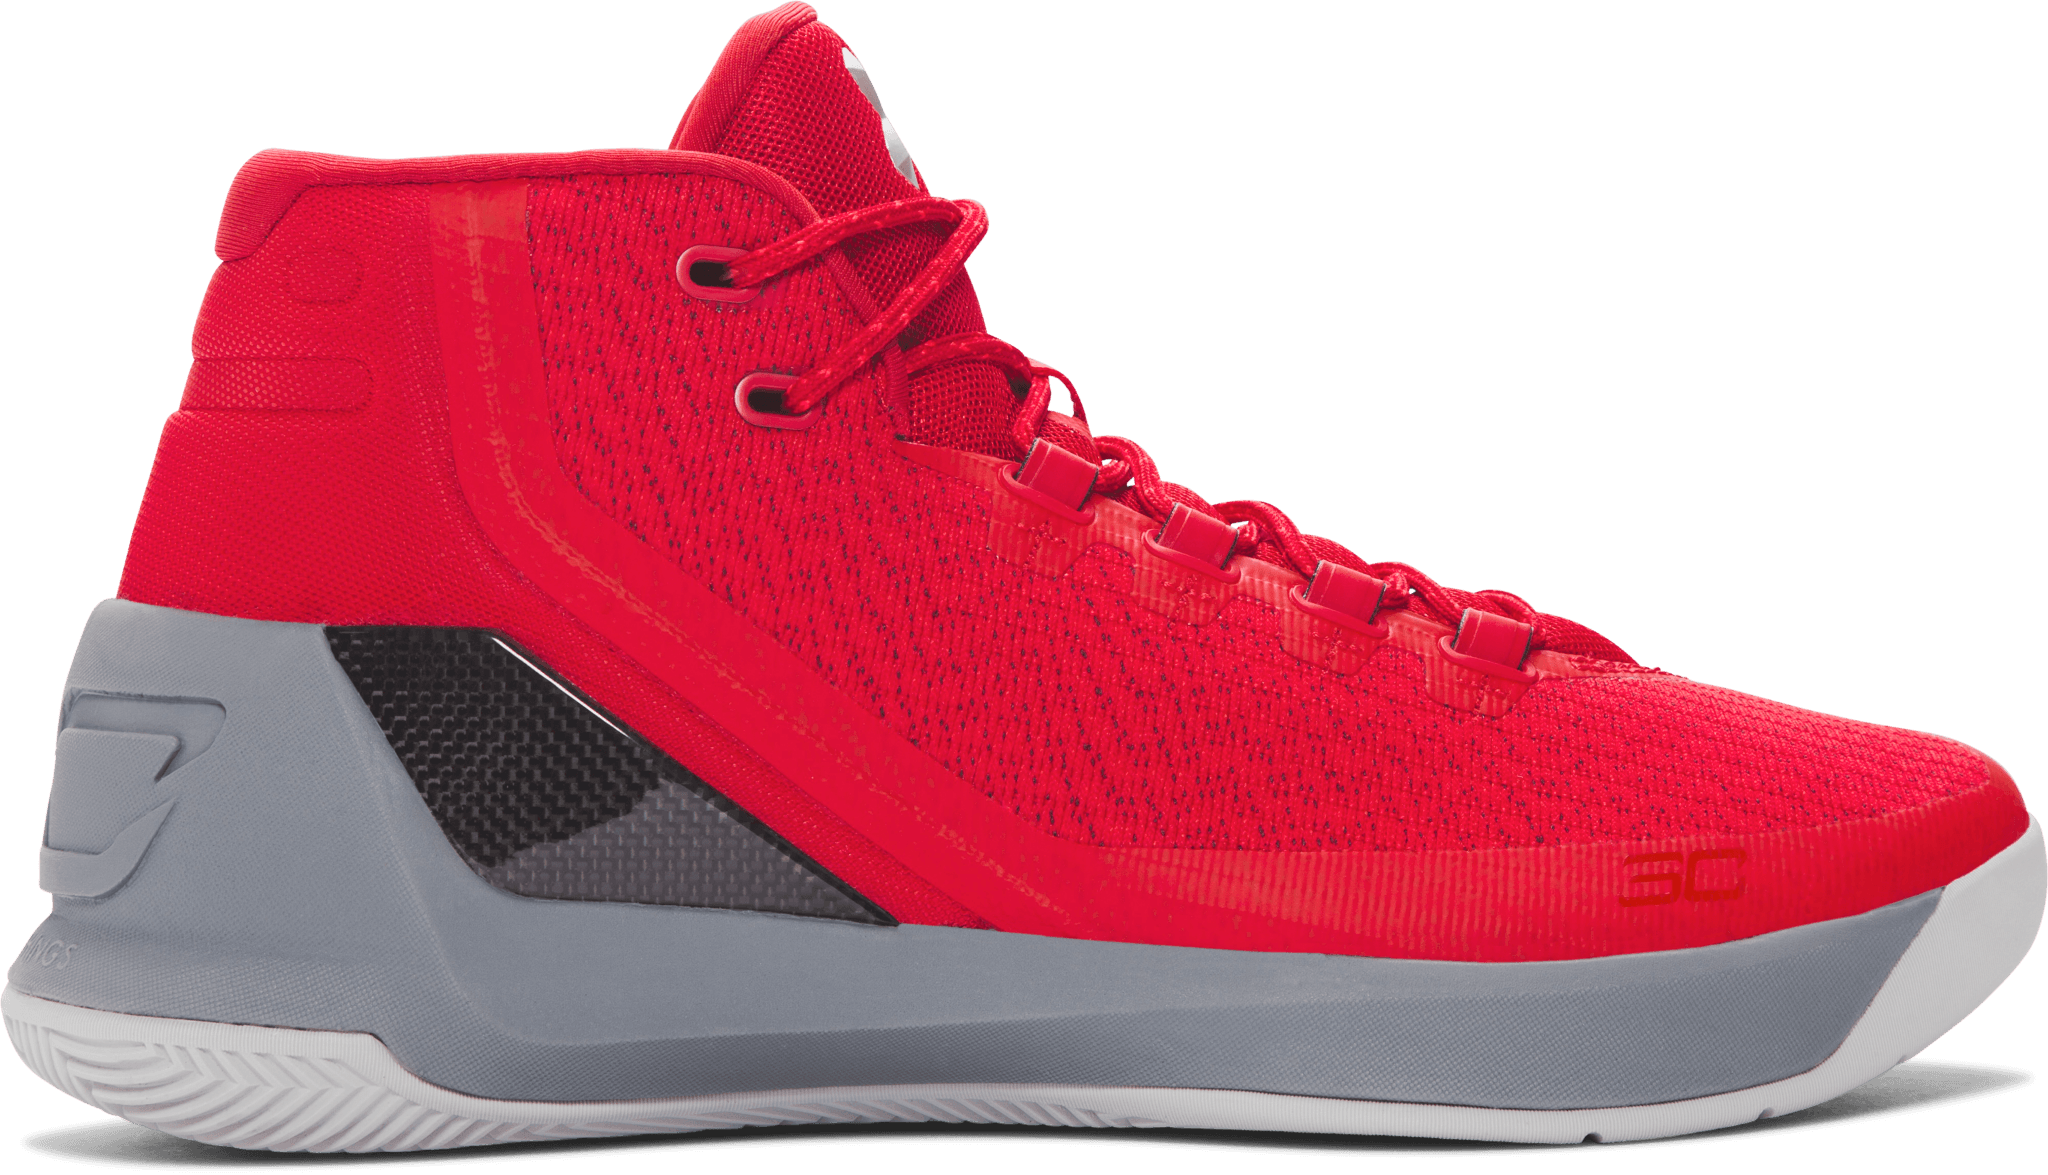 Under Armour Curry 3 Colorways - 17 Styles